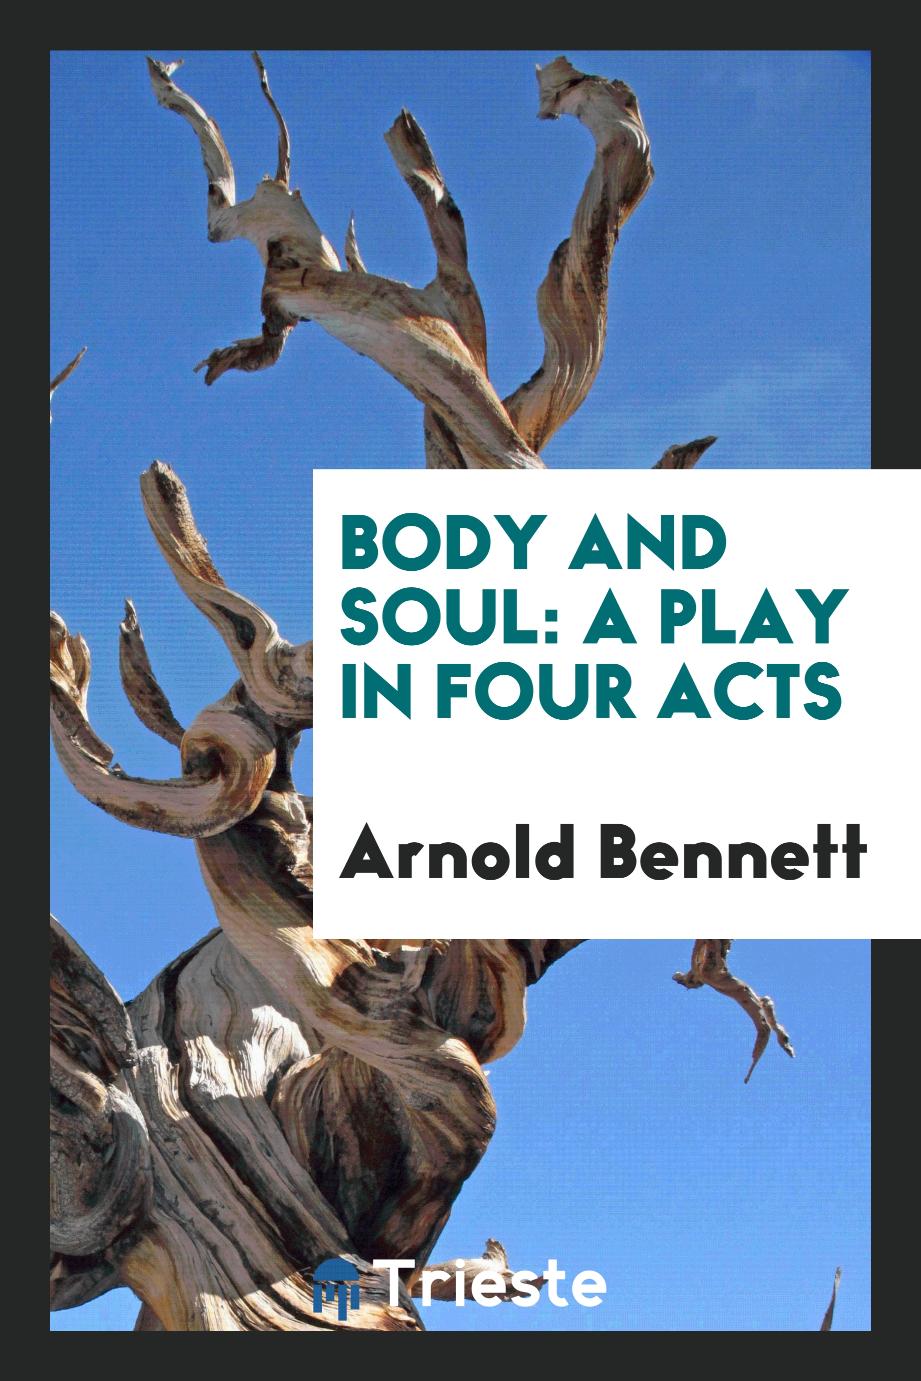 Body and Soul: A Play in Four Acts